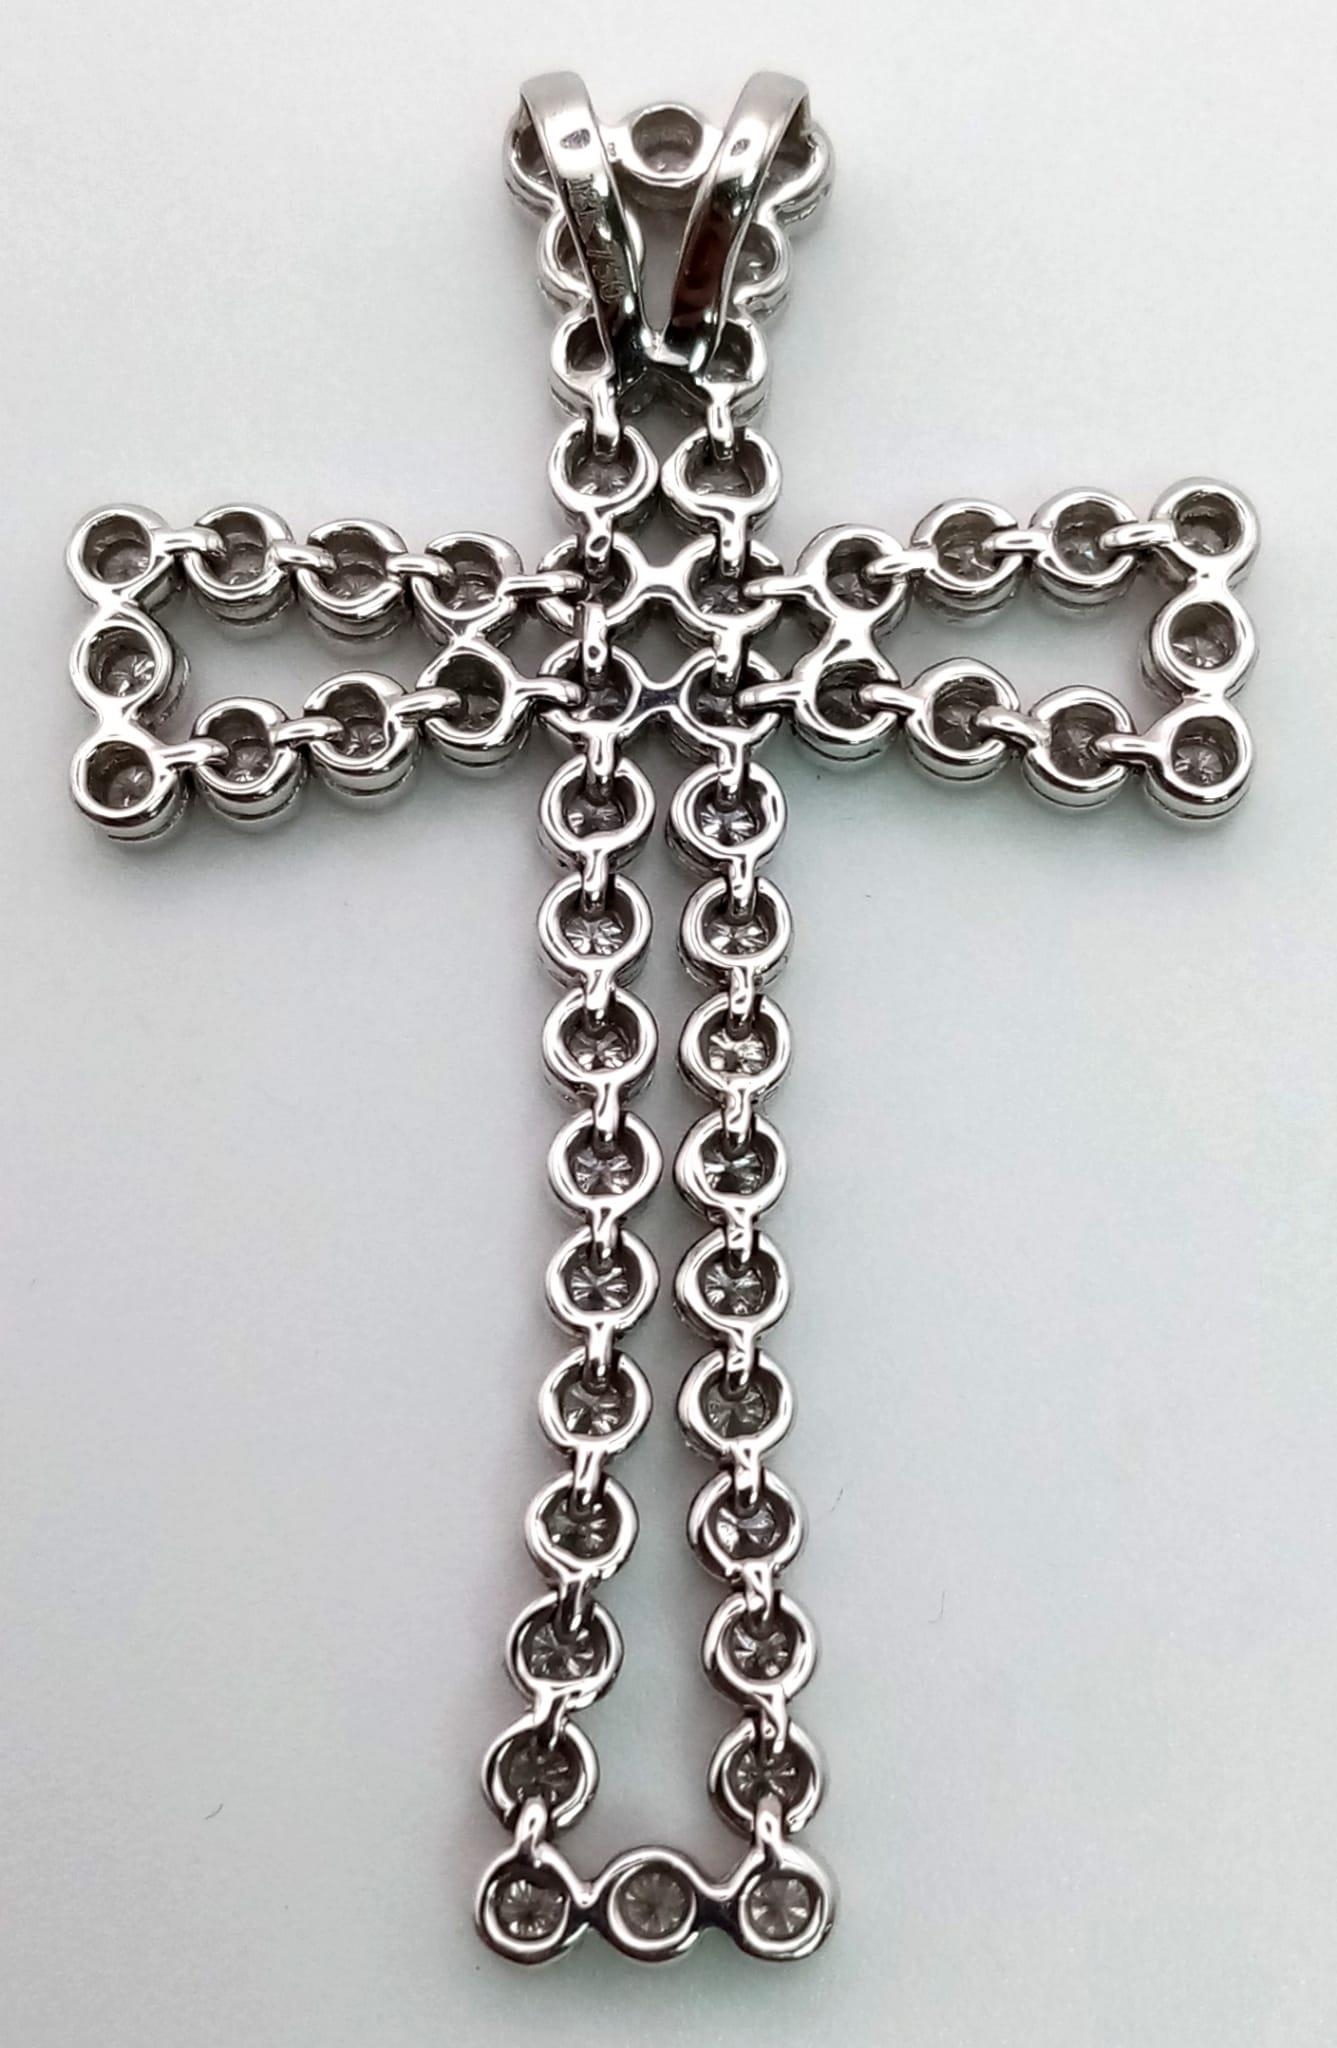 An 18K White Gold Diamond Cross Pendant. 5ct of exceptional bright round-cut diamonds create a - Image 2 of 4